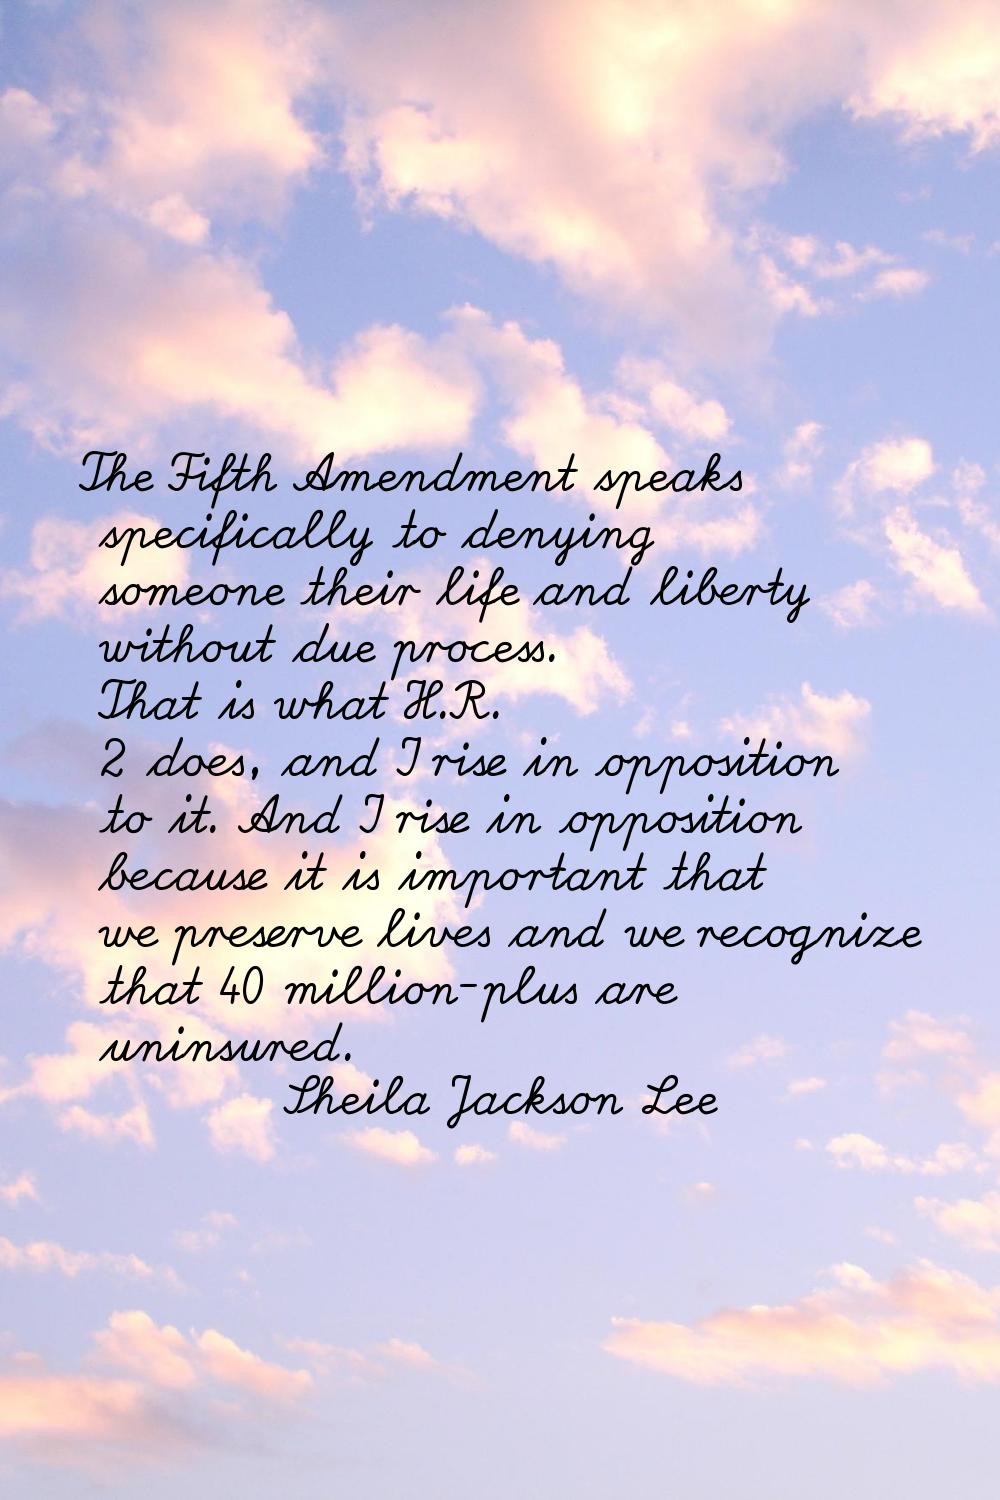 The Fifth Amendment speaks specifically to denying someone their life and liberty without due proce